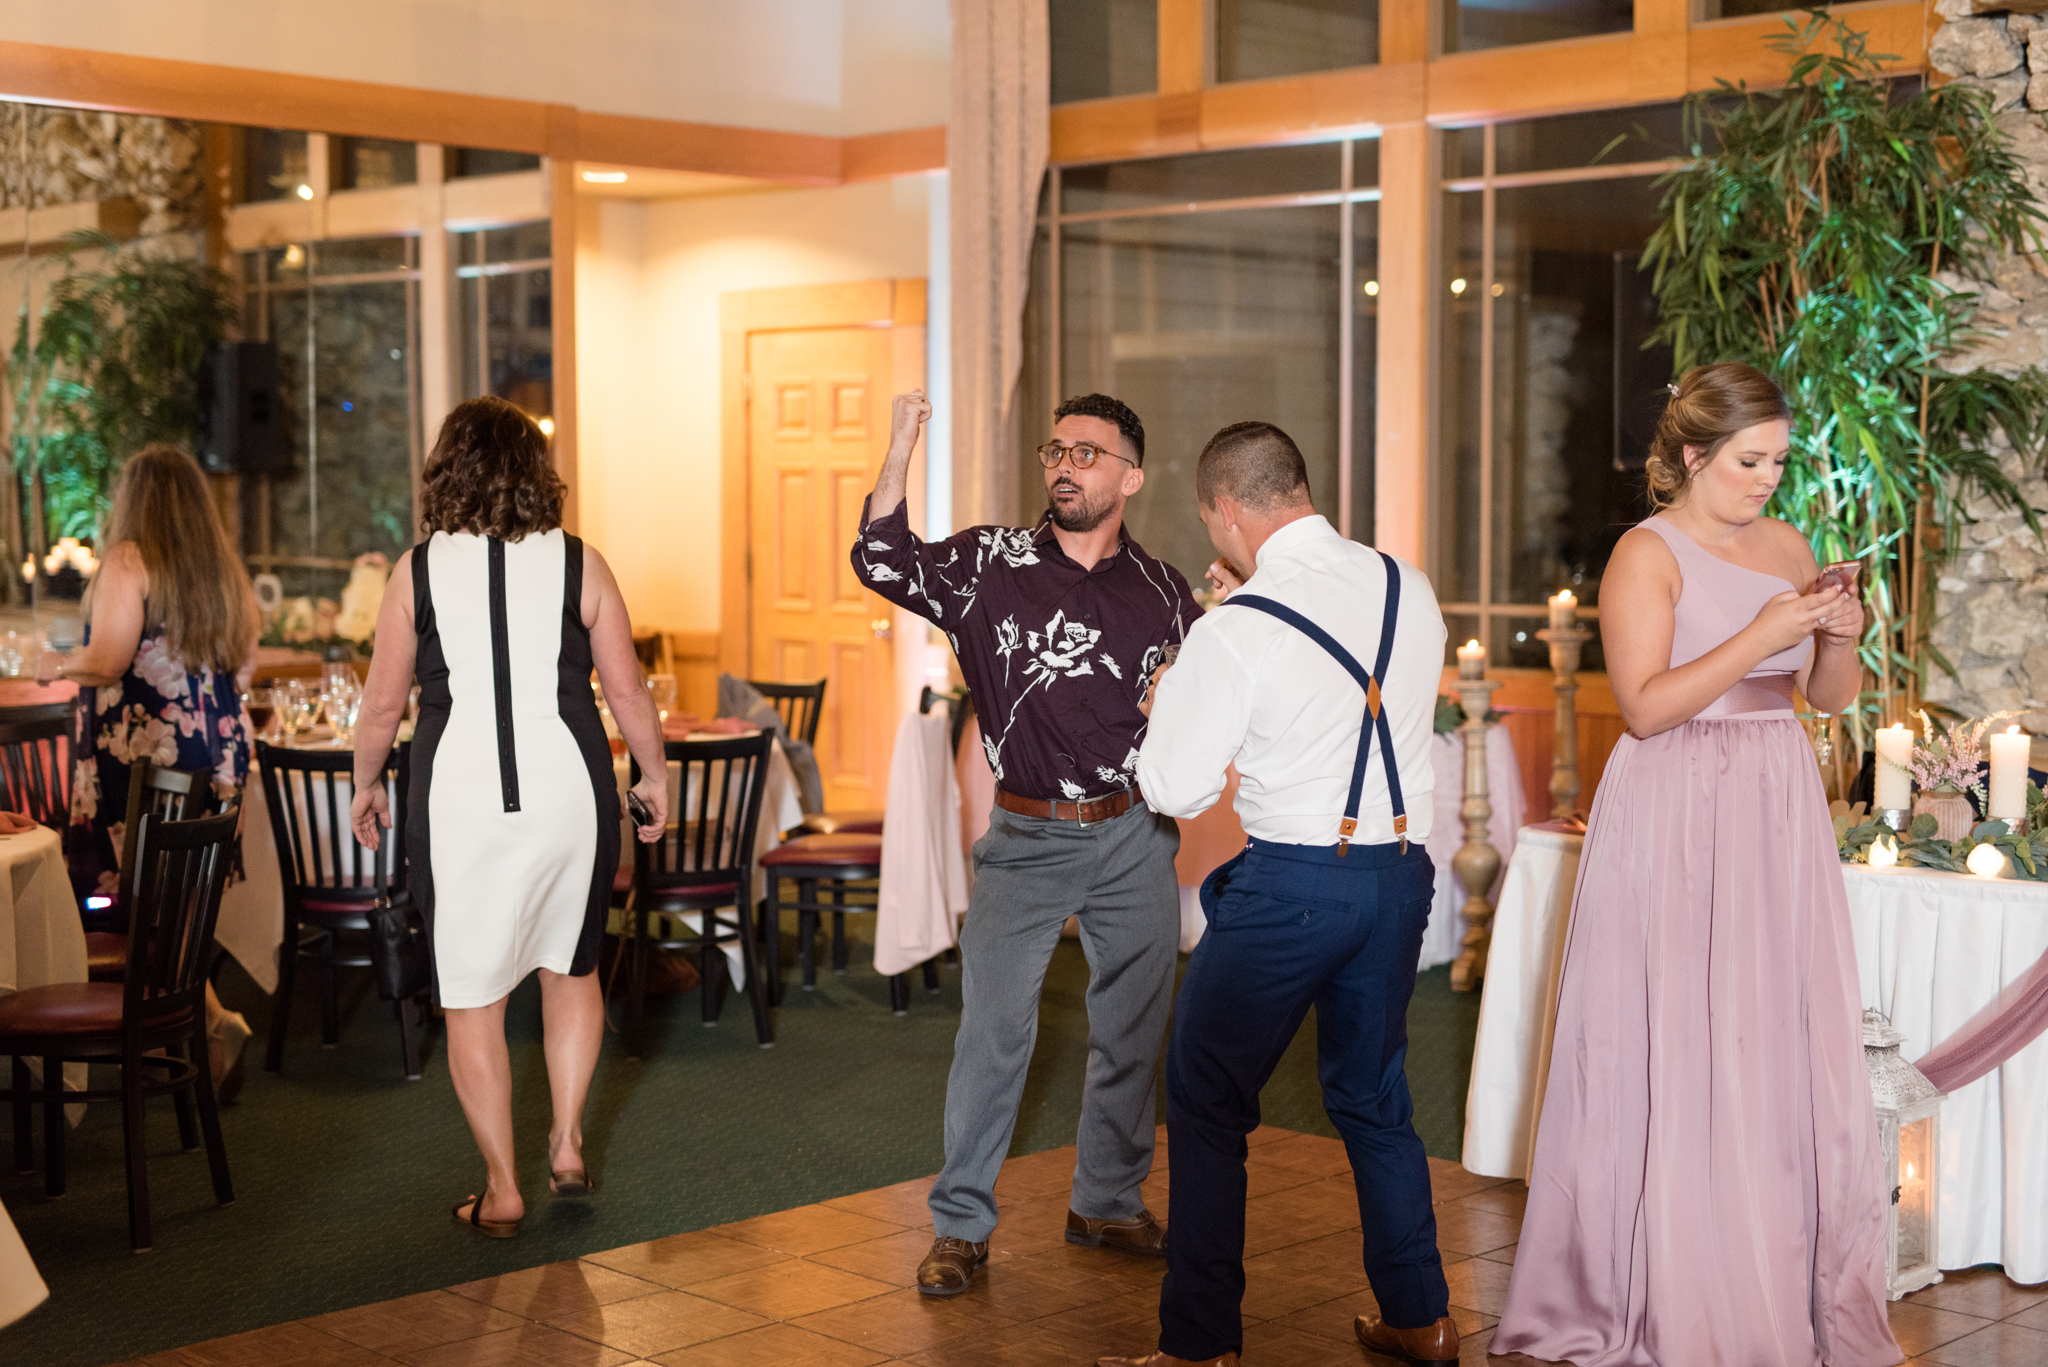 Wedding guests dance at reception.